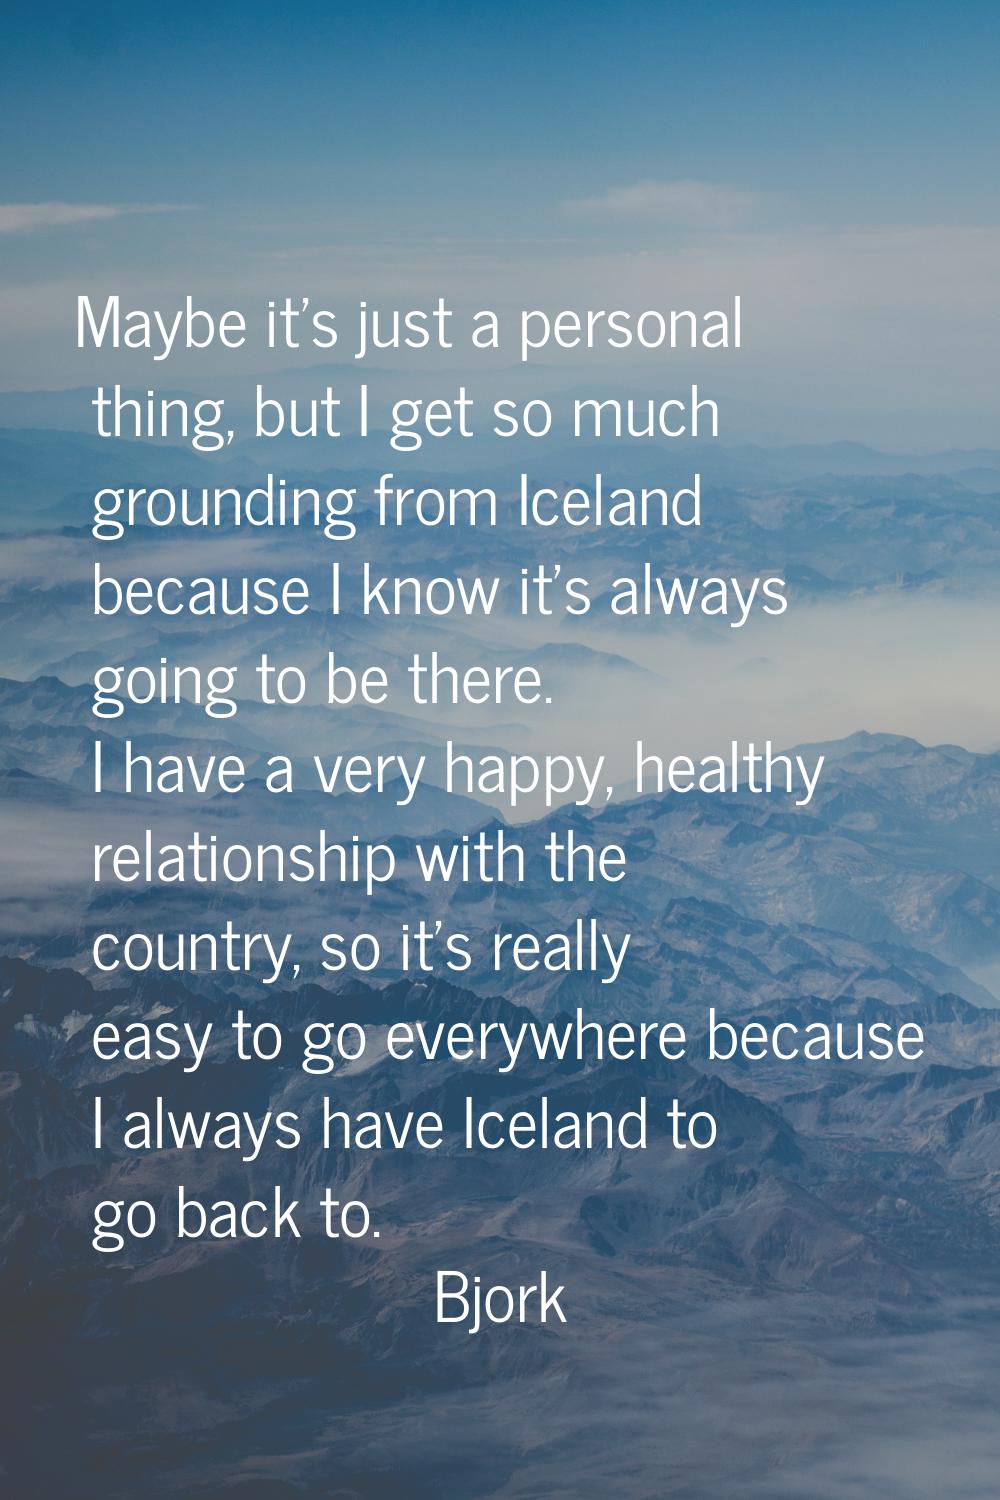 Maybe it's just a personal thing, but I get so much grounding from Iceland because I know it's alwa